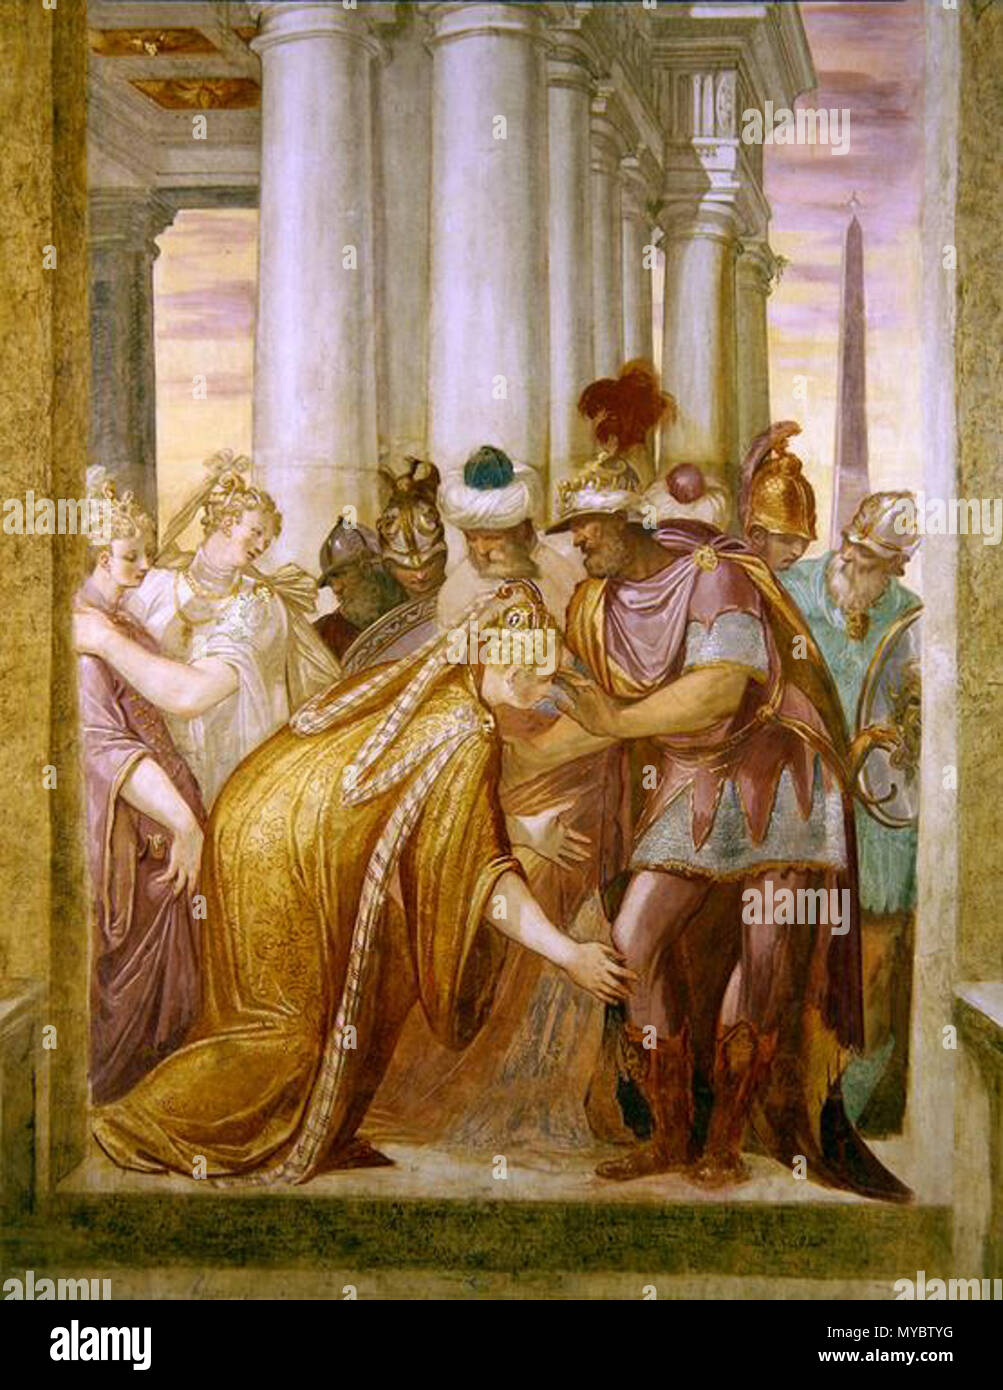 . parete centrale mostra la supplica di Sofonisba a Massinissa . Massinissa was king of Numidia and Sofonisba the daughter of his enemy and later his wife . C16 103 Central wall depicting Sophonisba requesting help from Massinissa (C16) Stock Photo